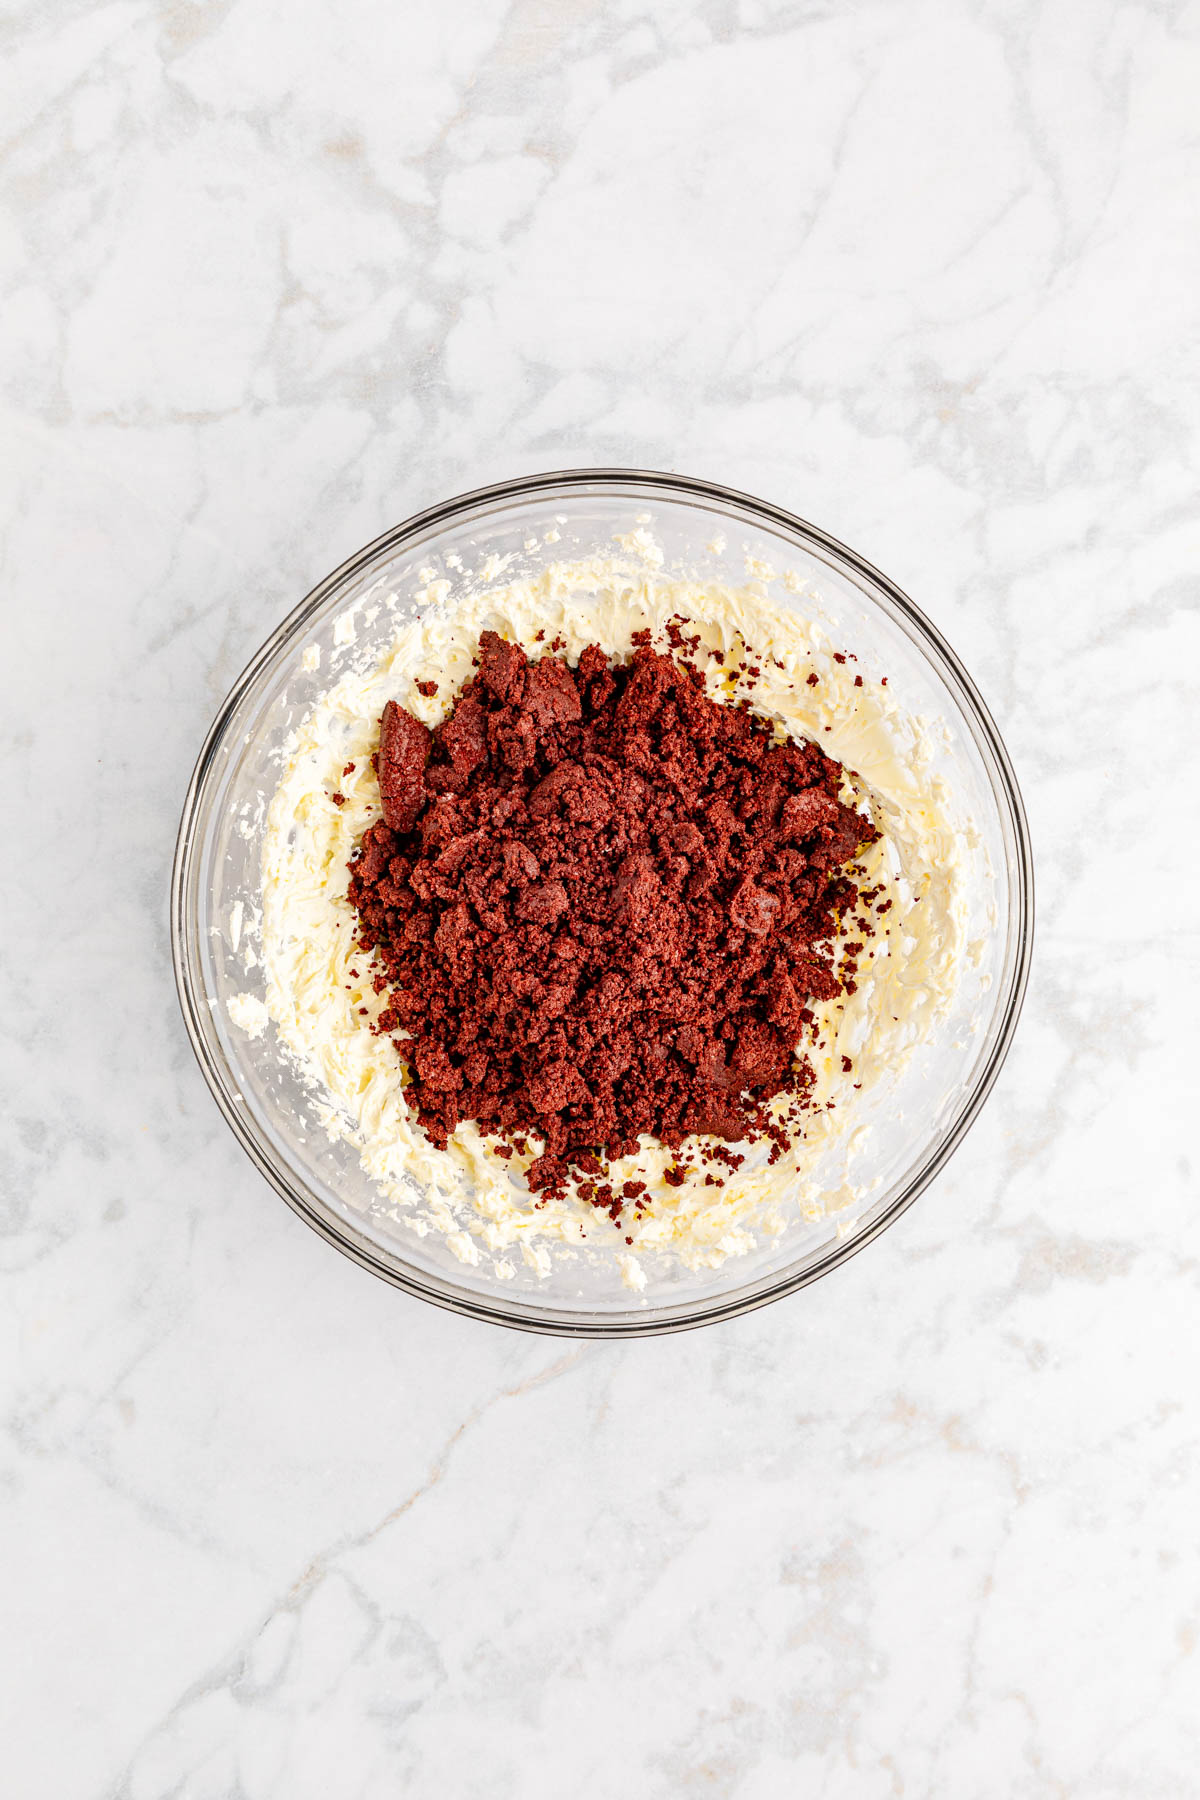 Red velvet Oreo crumbs and cream cheese in a glass bowl.